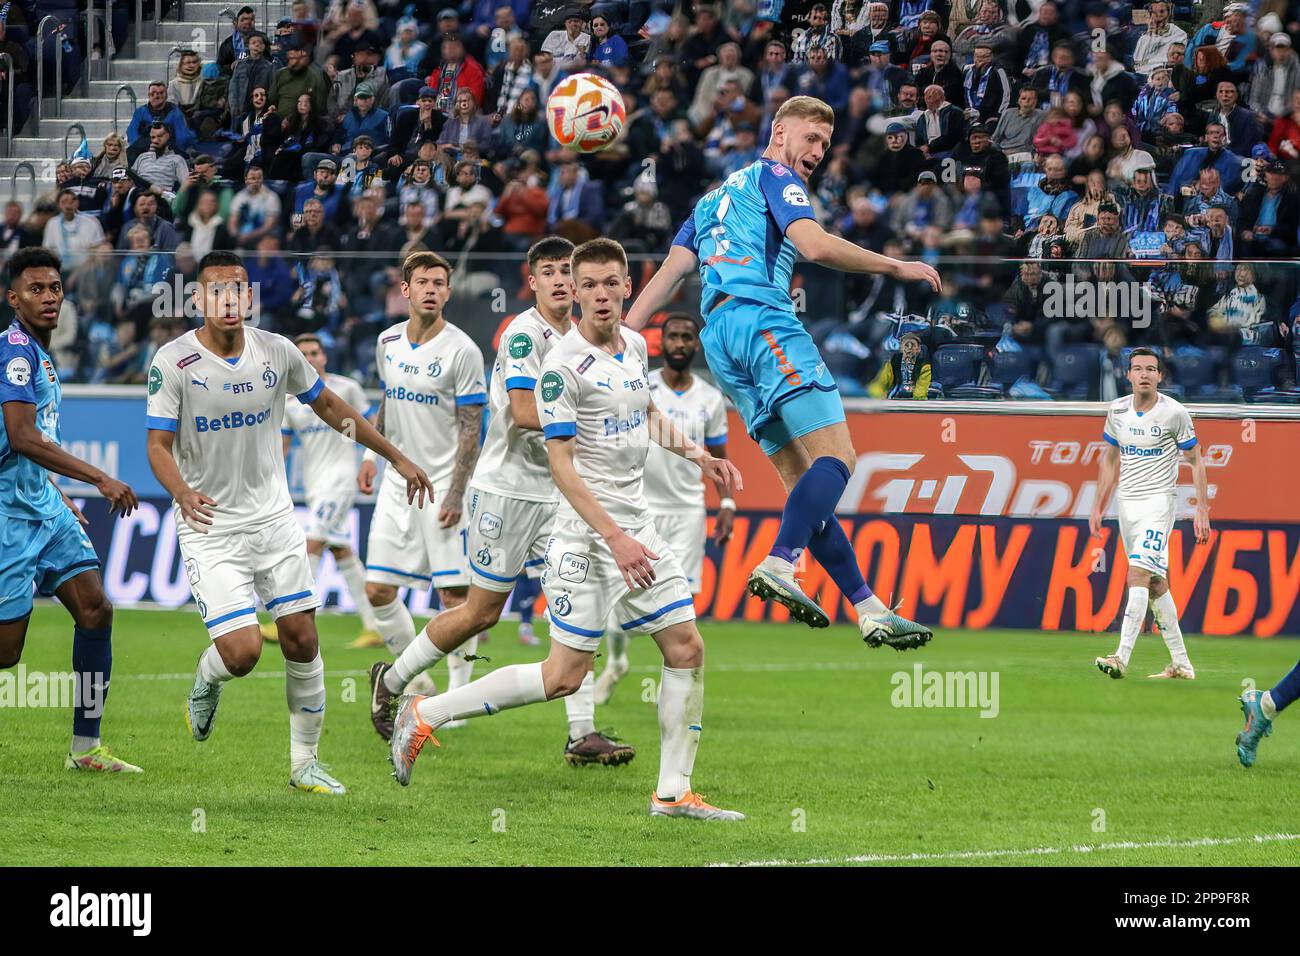 Saint Petersburg, Russia. 22nd Apr, 2023. Aleksandr Kutitsky (No.50), Roberto Fernandez (No.6), Fedor Smolov (10) of Dynamo and Dmitri Chistyakov (No.2) of Zenit in action during the Russian Premier League football match between Zenit Saint Petersburg and Dynamo Moscow at Gazprom Arena. Zenit 3:1 Dynamo. Credit: SOPA Images Limited/Alamy Live News Stock Photo